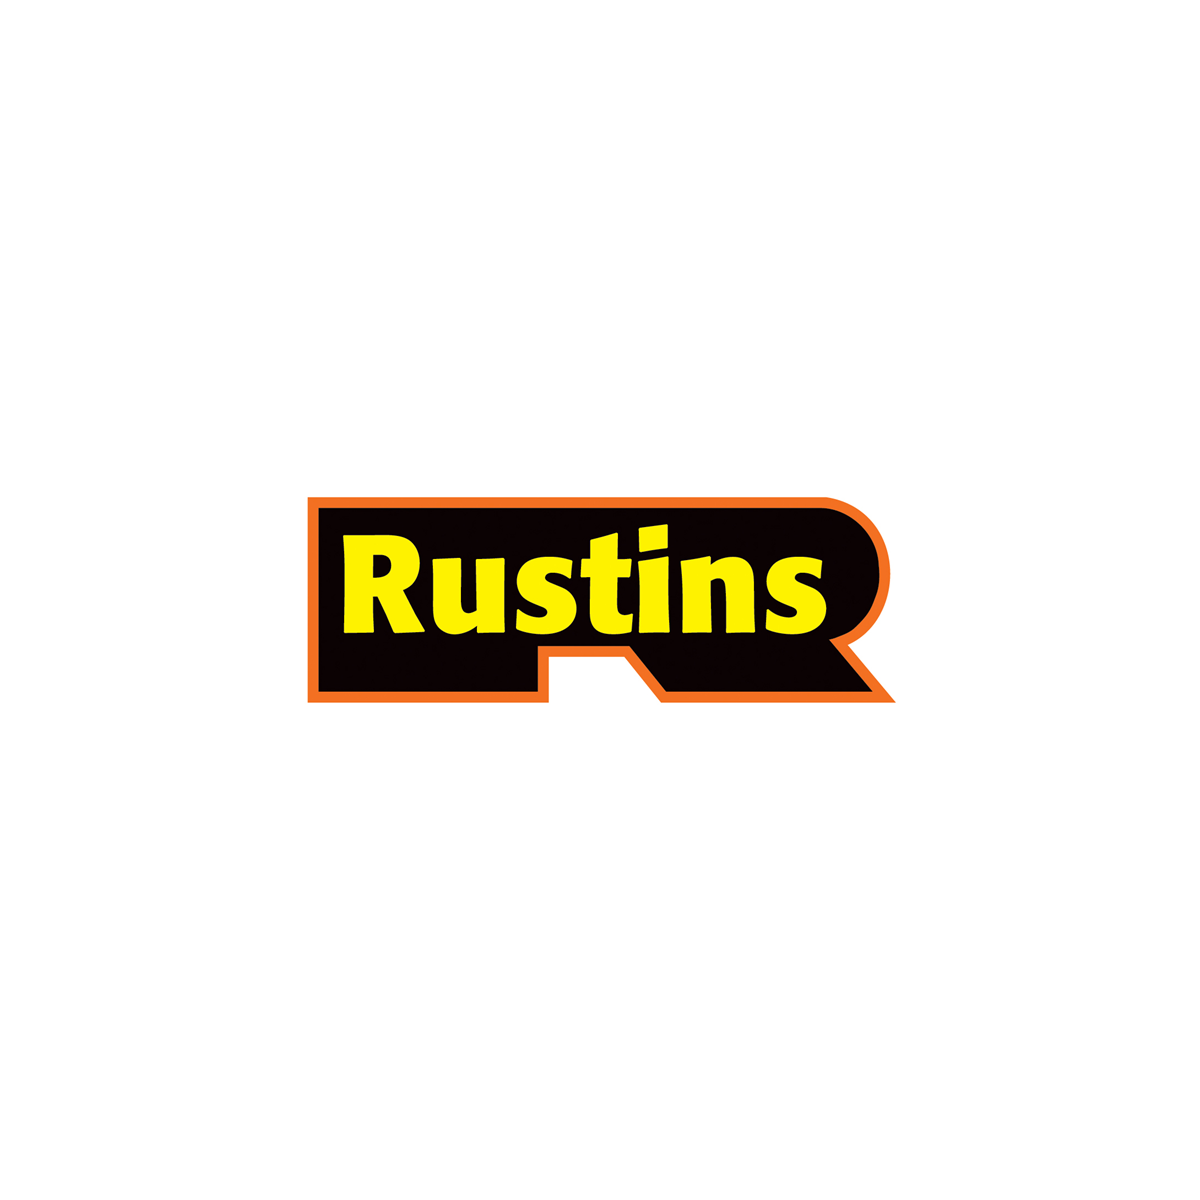 Where to buy Rustins Products online